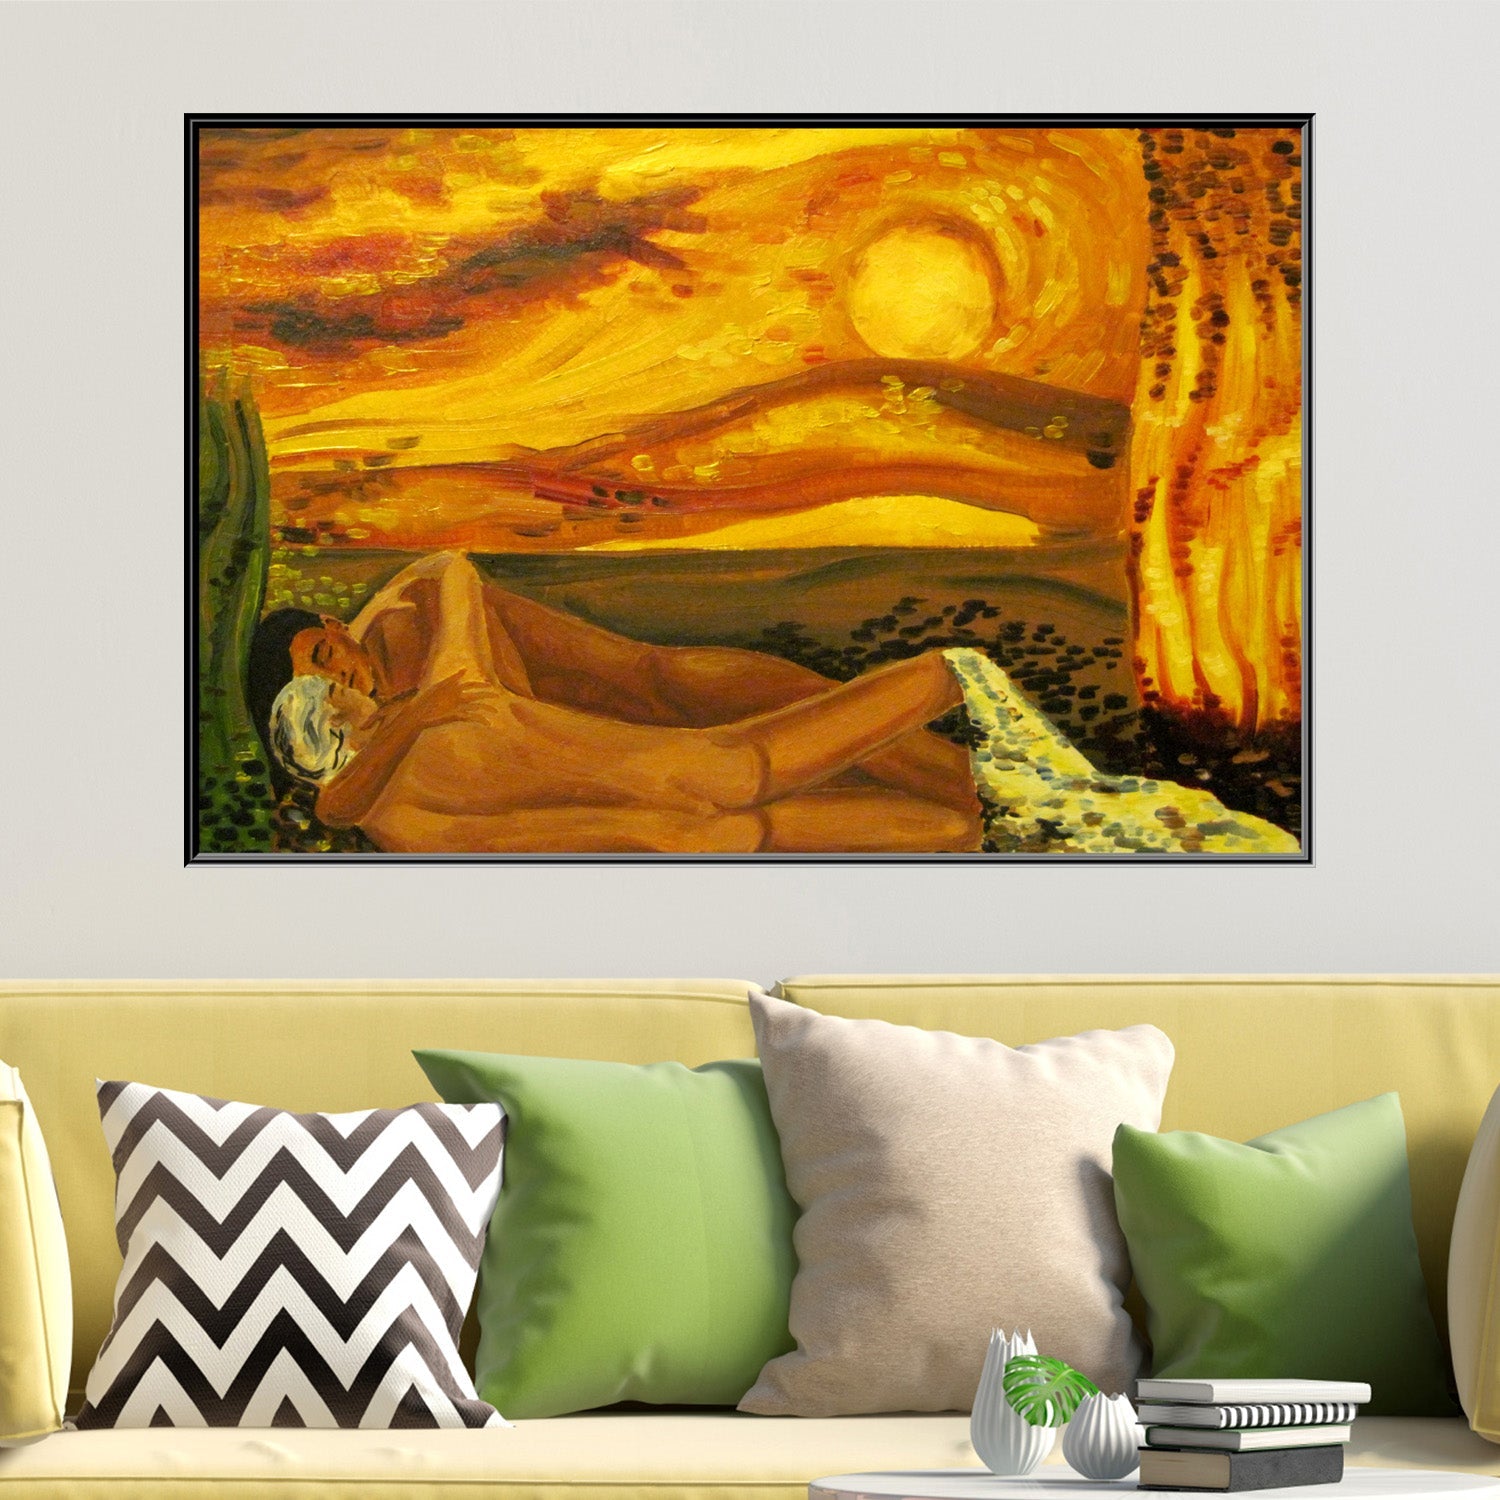 https://cdn.shopify.com/s/files/1/0387/9986/8044/products/CoupleatSunsetCanvasArtprintStretched-2.jpg